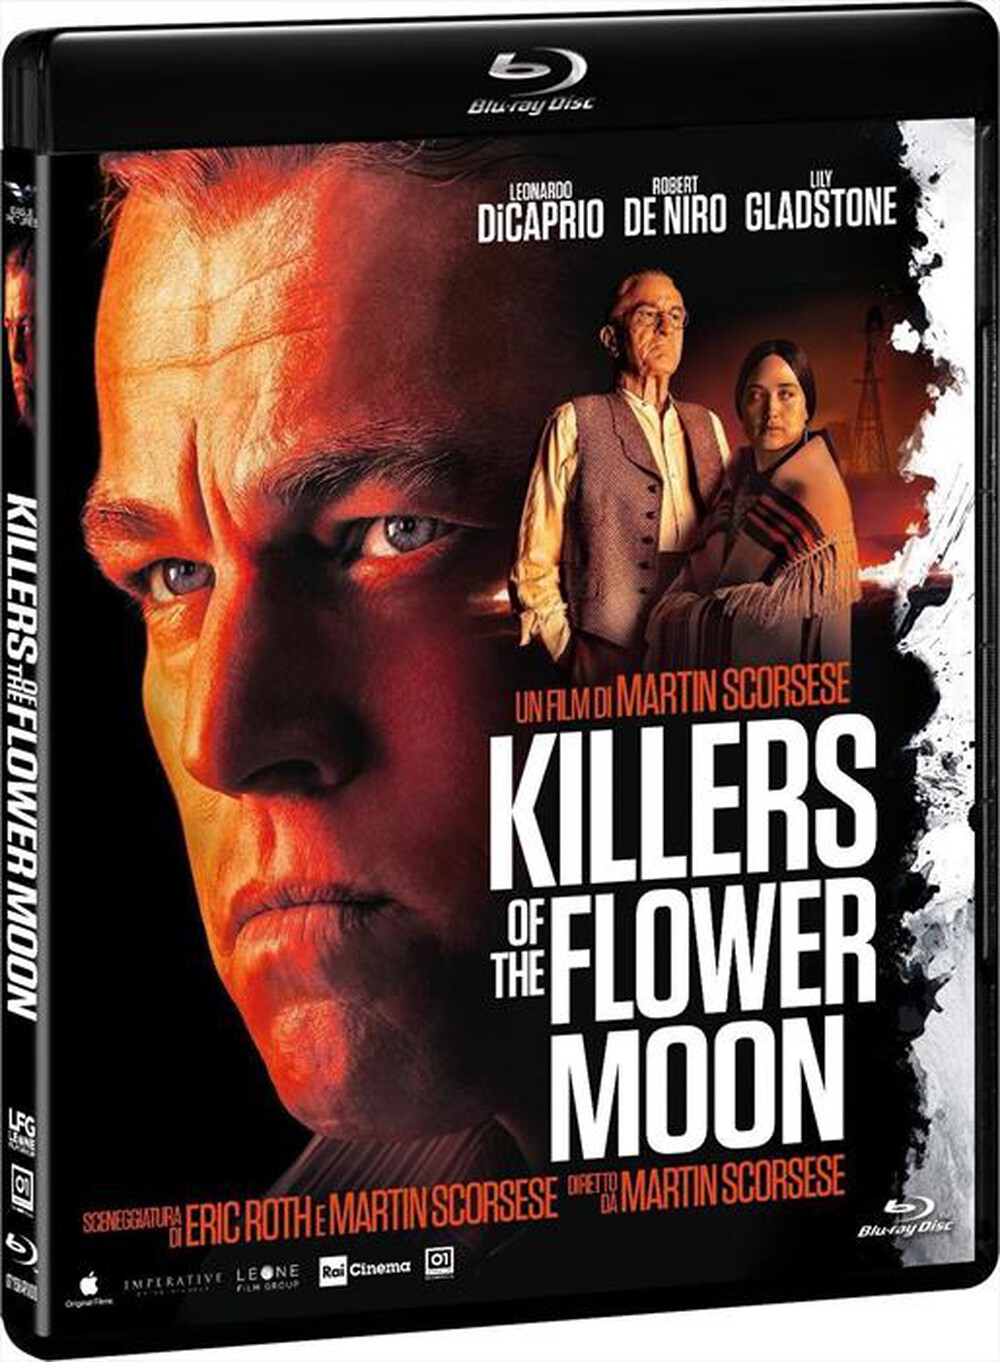 "EAGLE PICTURES - Killers Of The Flower Moon"